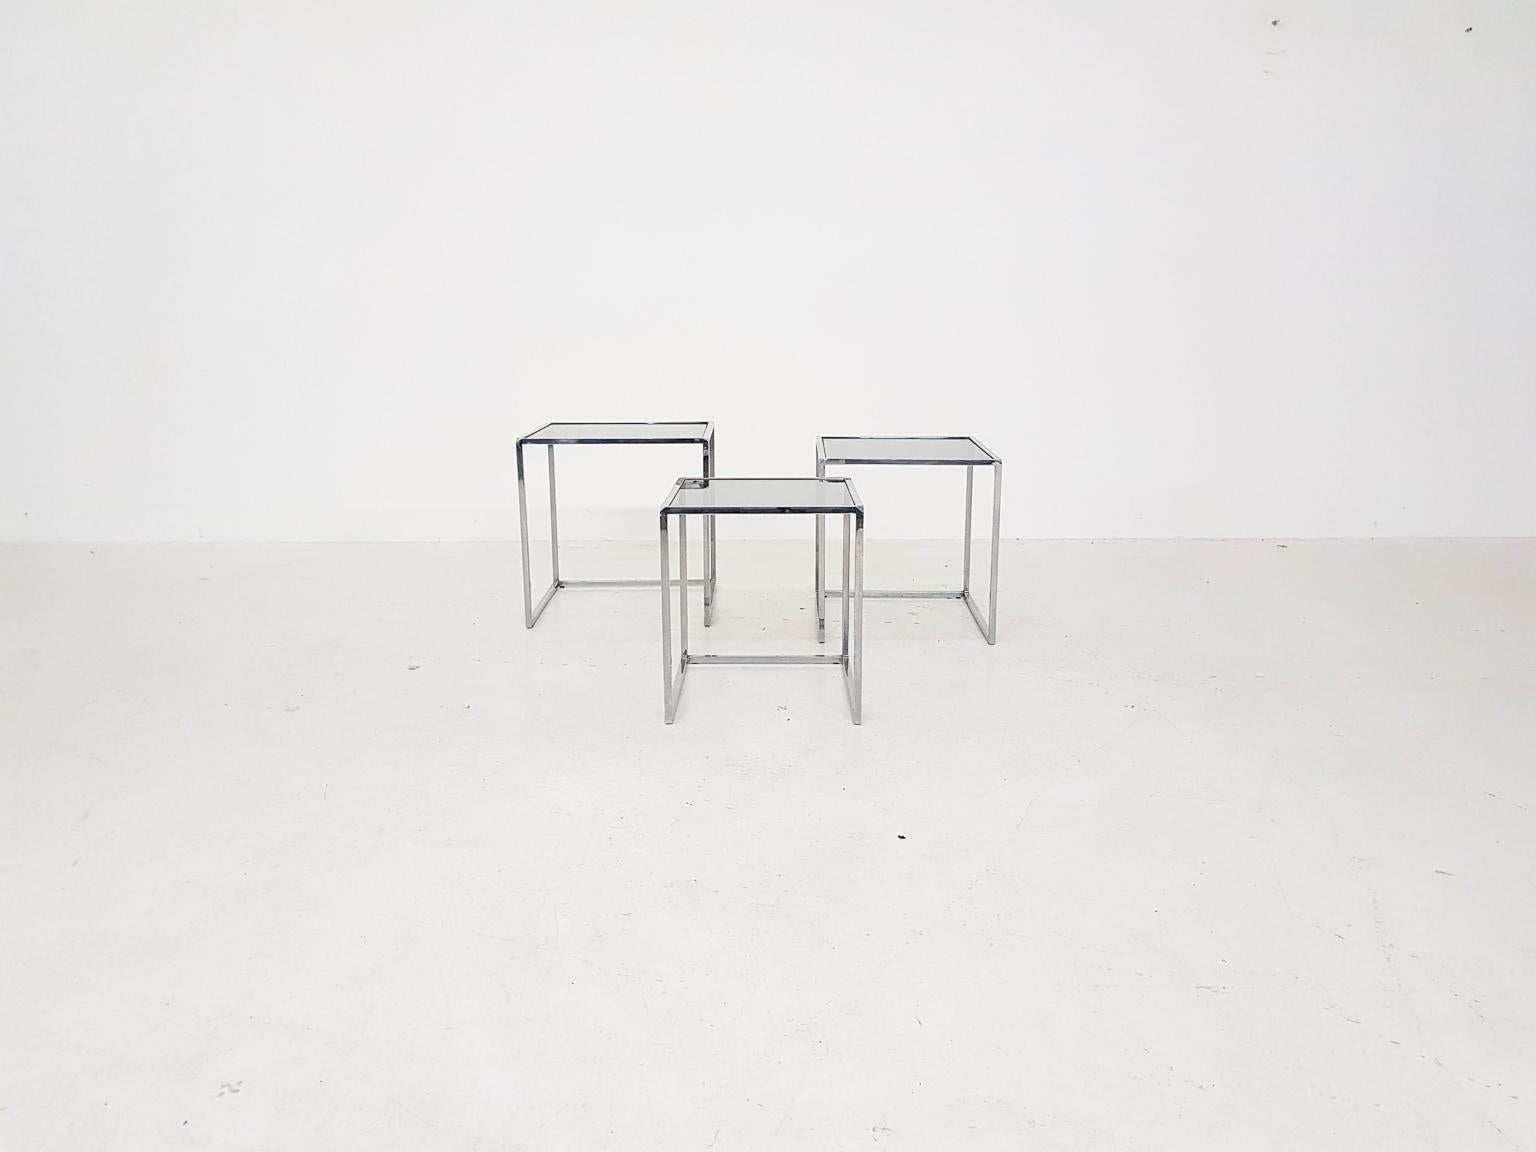 A nice set of three nesting tables made of chromed metal with a smoked glass top. The tables have some resemblances with the PK71 mimiset by Poul Kjaerholm for E. Kold Christensen or Fritz Hansen.

We think it is Dutch made in the 1970s. Tables